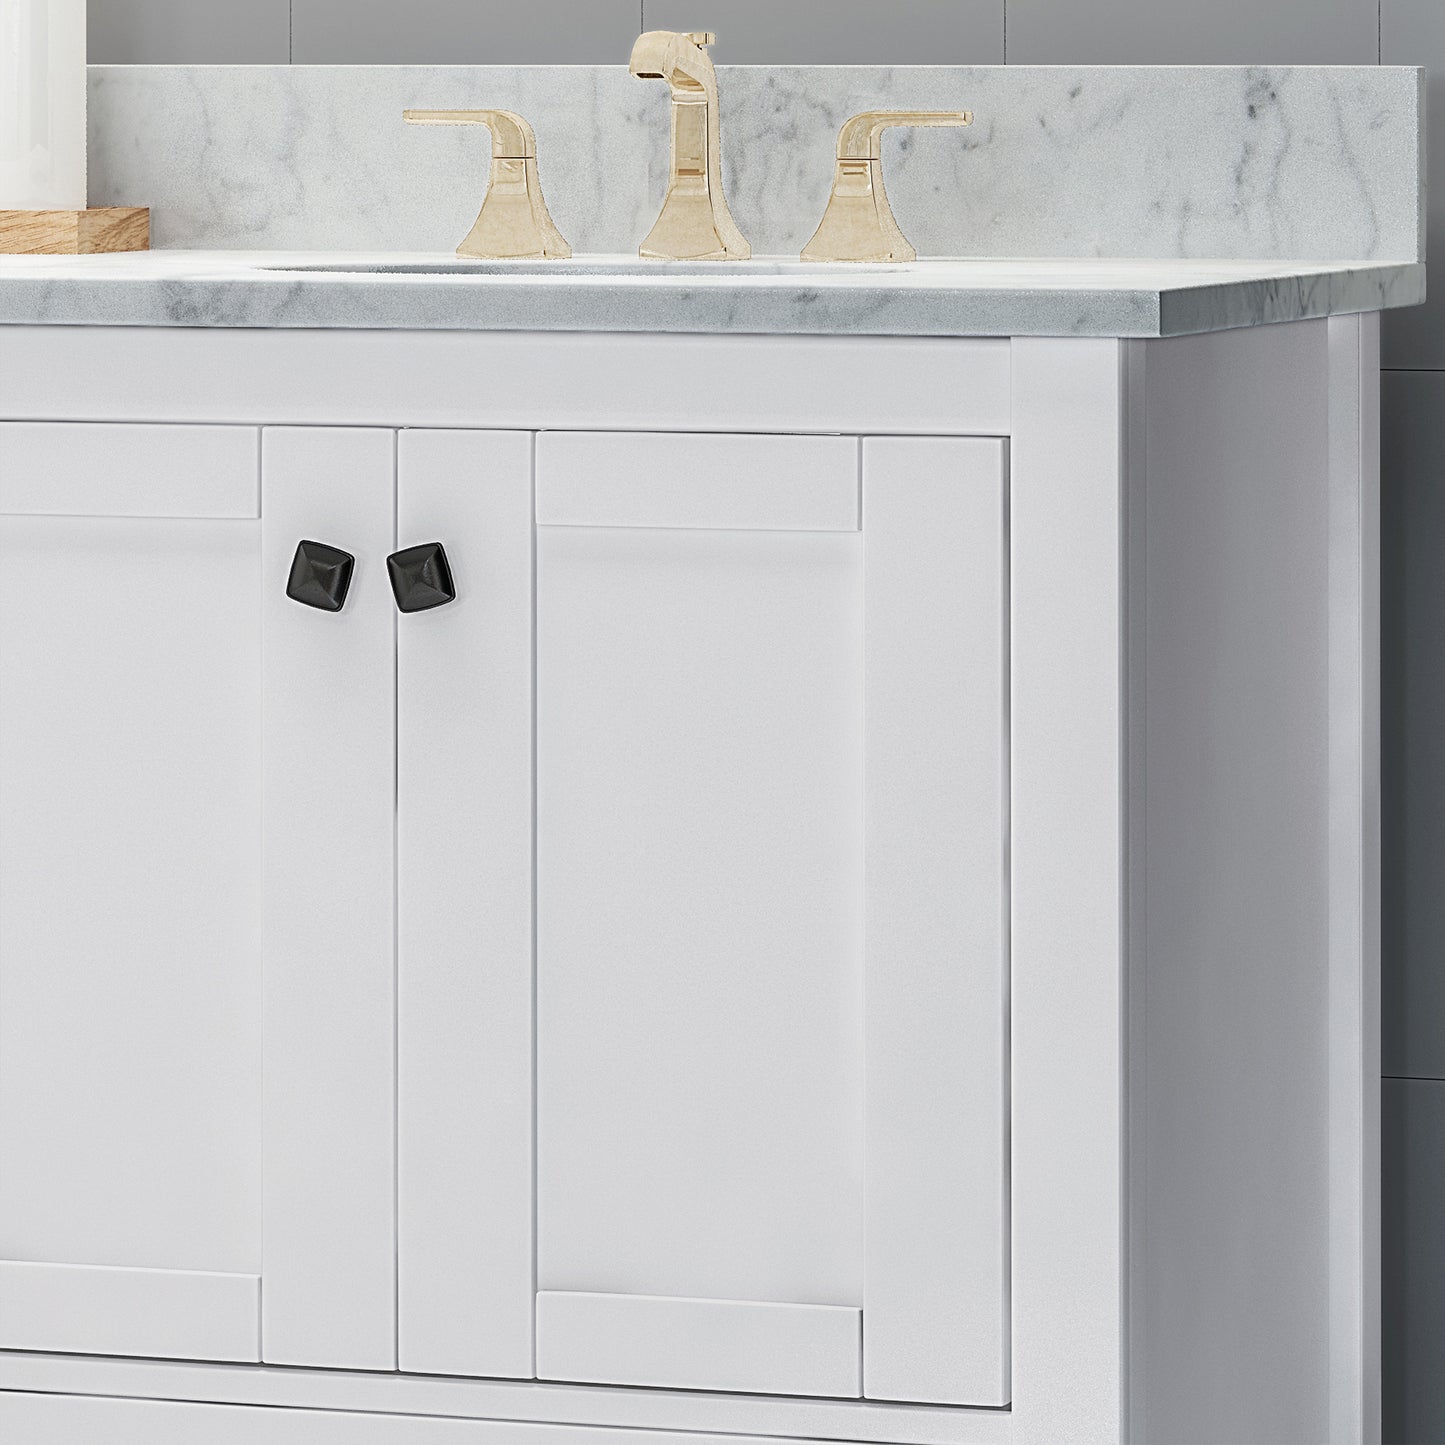 Laranne Contemporary 72" Wood Double Sink Bathroom Vanity with Marble Counter Top with Carrara White Marble